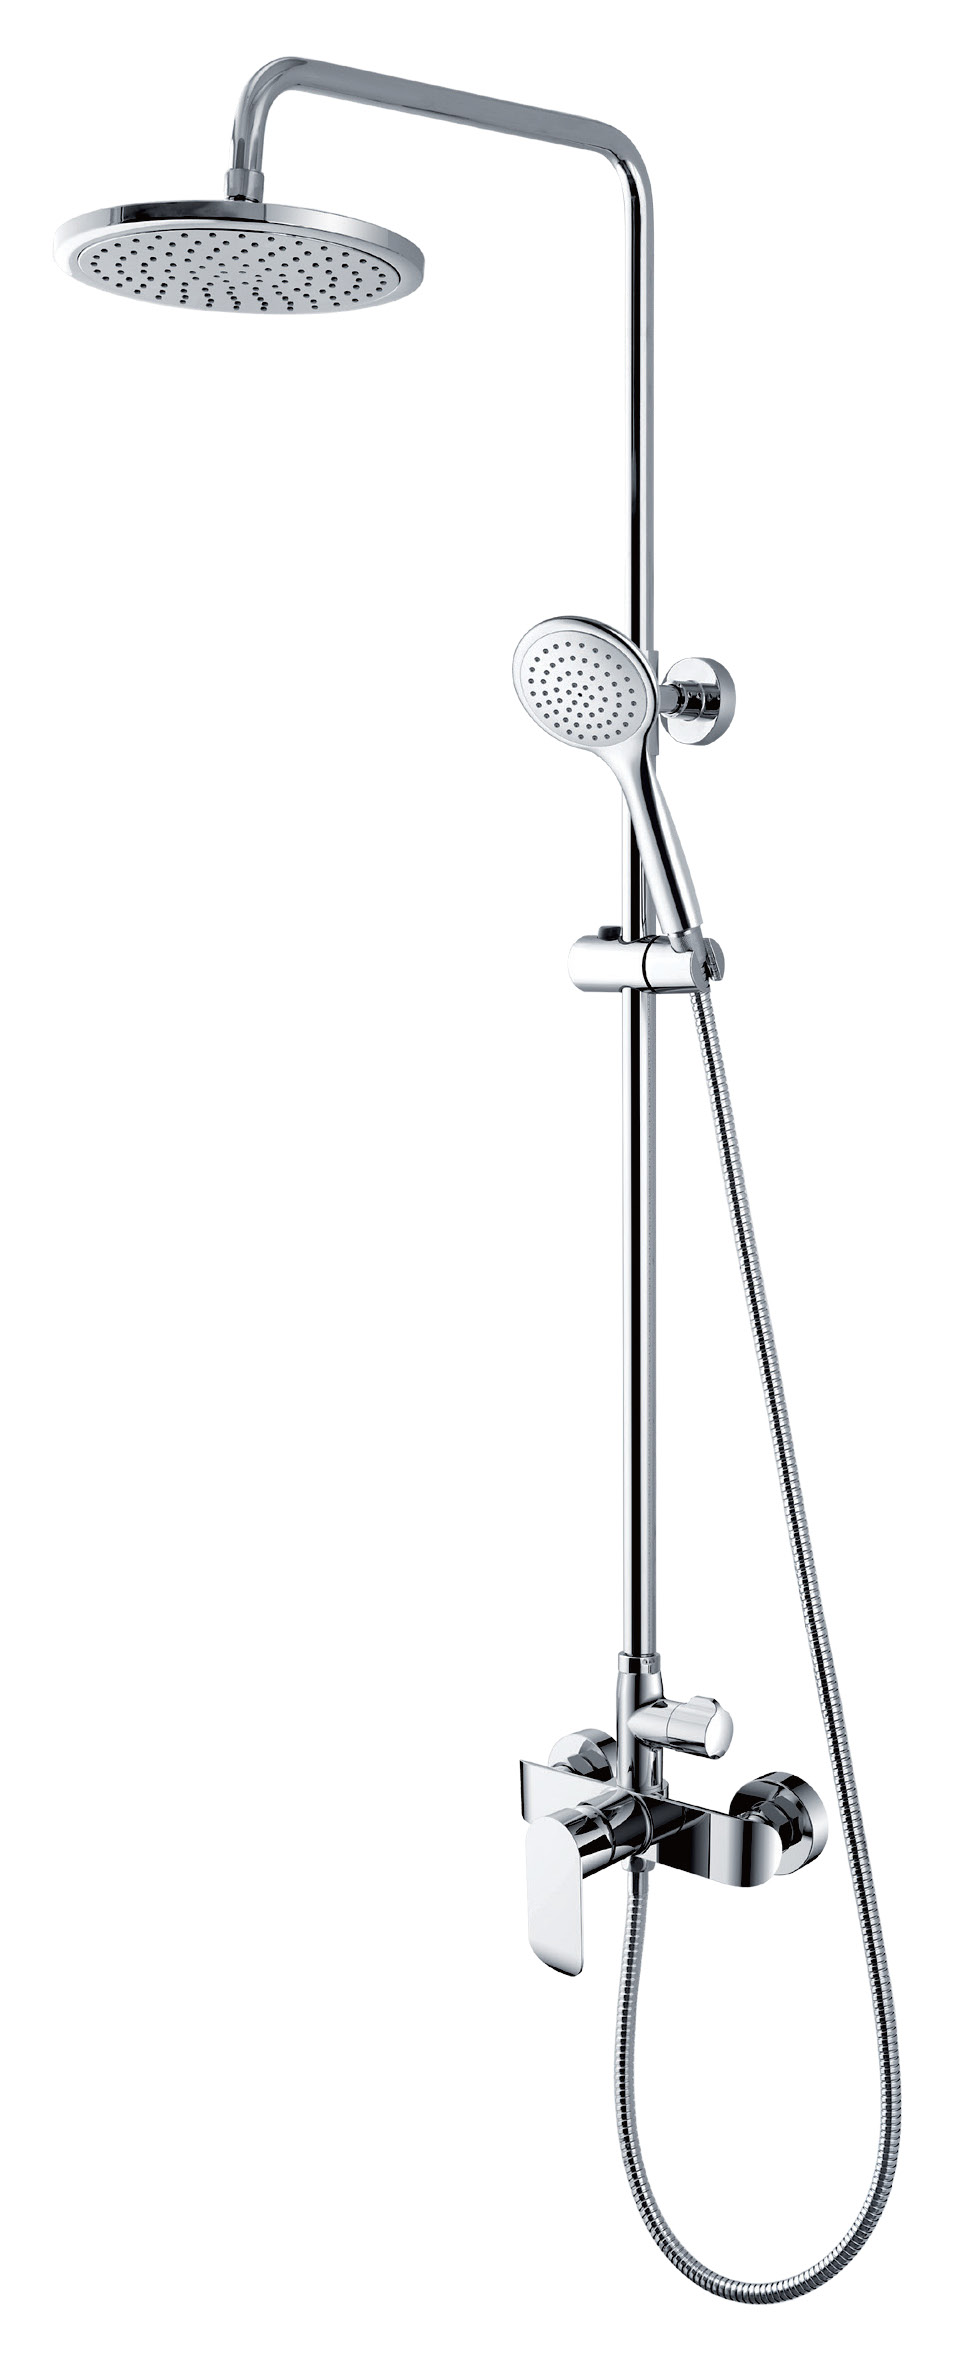 Shower Head With Handheld Spray Bathroom Shower Faucet